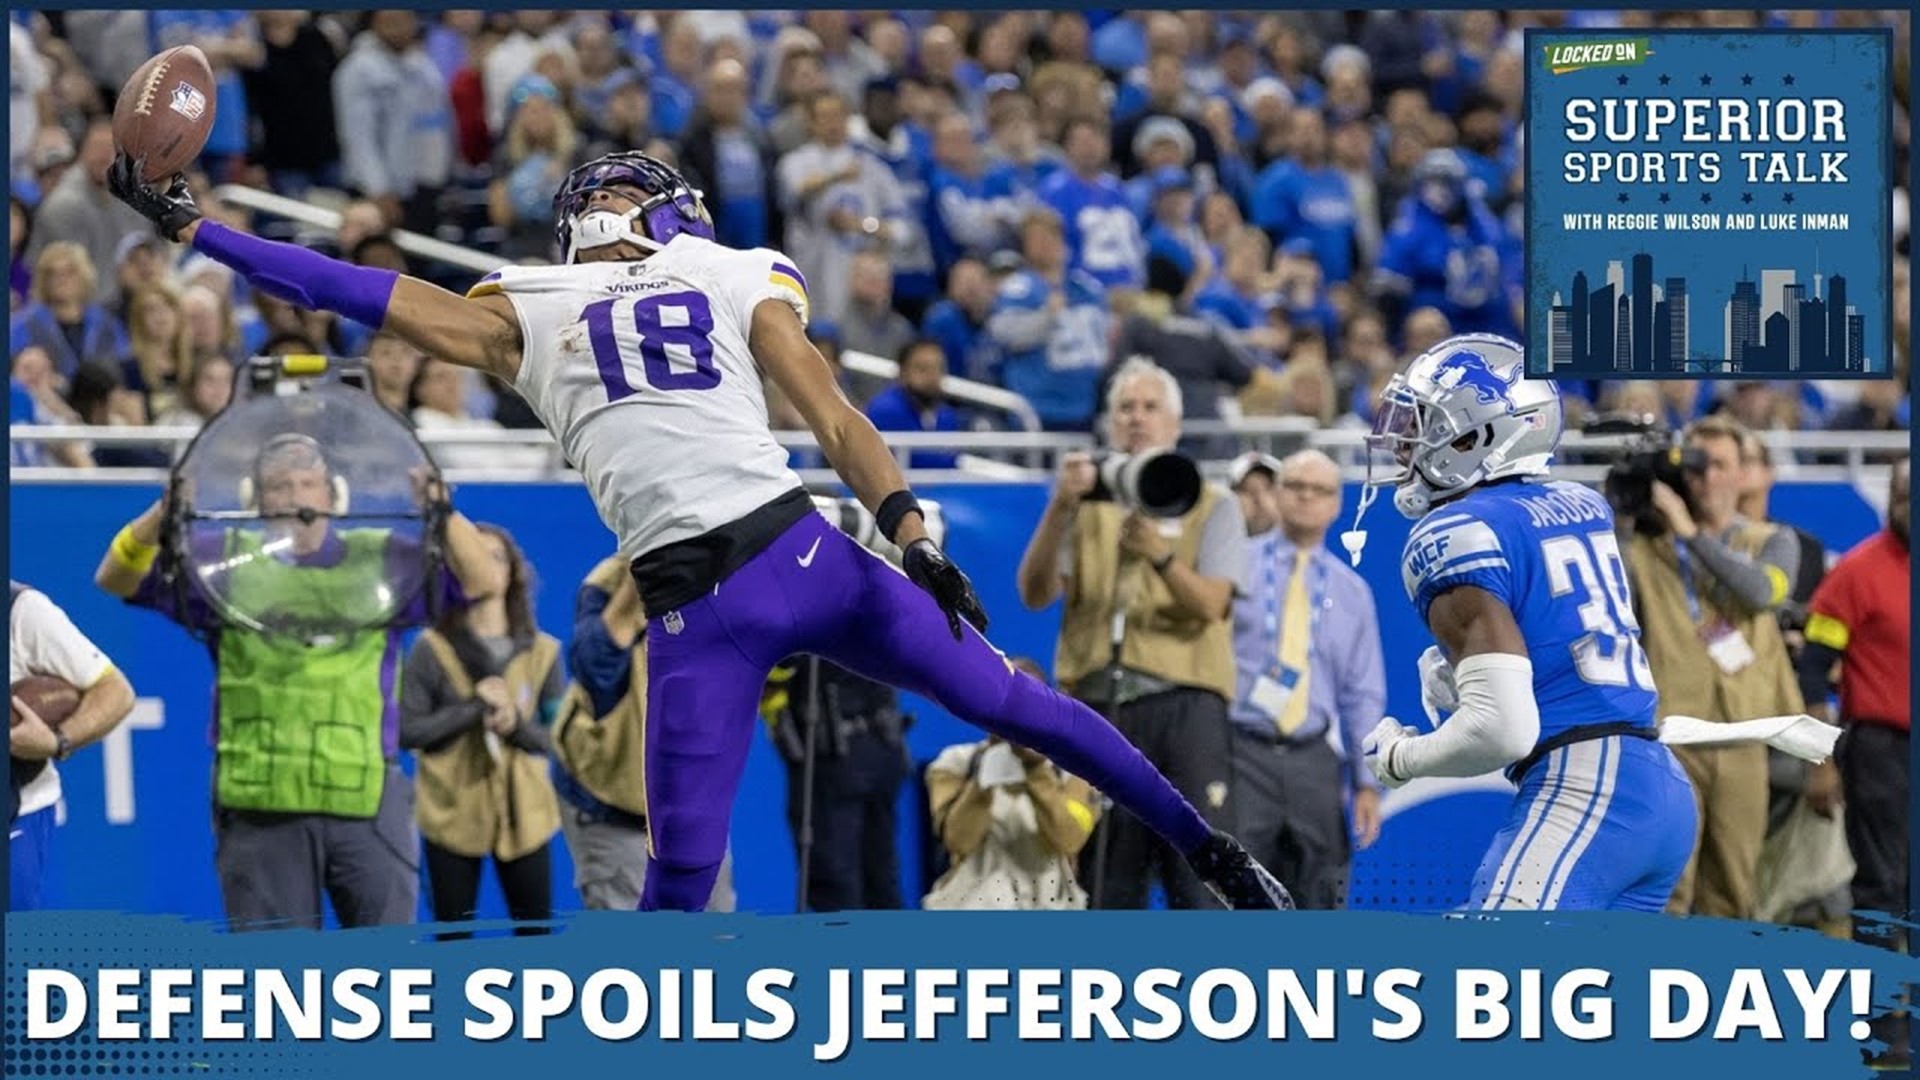 Minnesota Vikings fell short to the Detroit Lions after being exposed defensively without Harrison Smith and a banged up secondary.